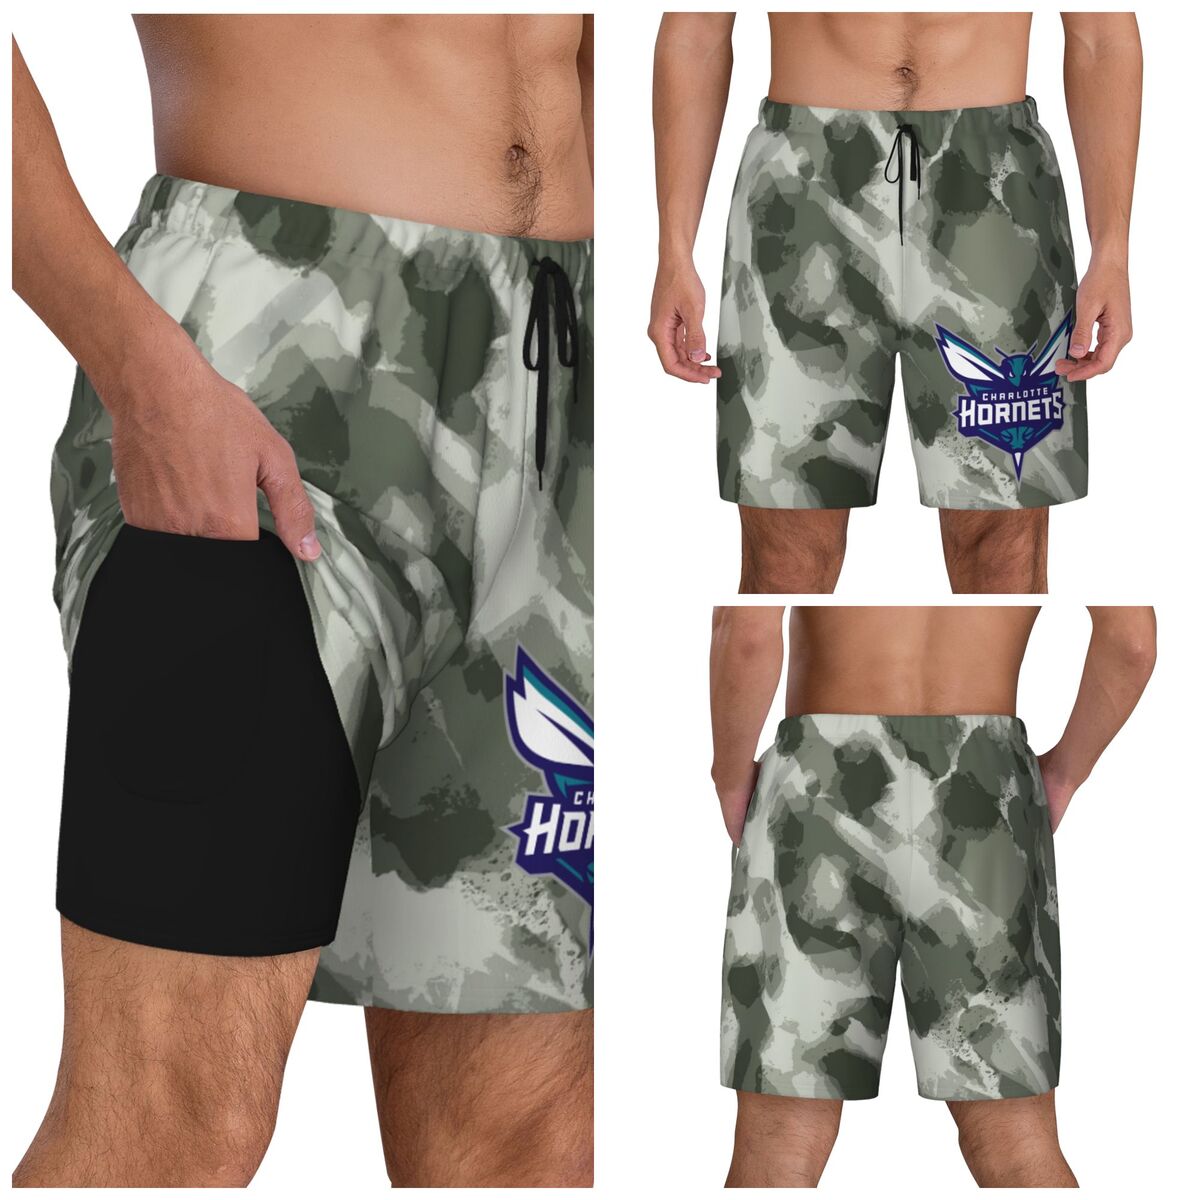 Charlotte Hornets Camo Men's Swim Trunks with Compression Liner